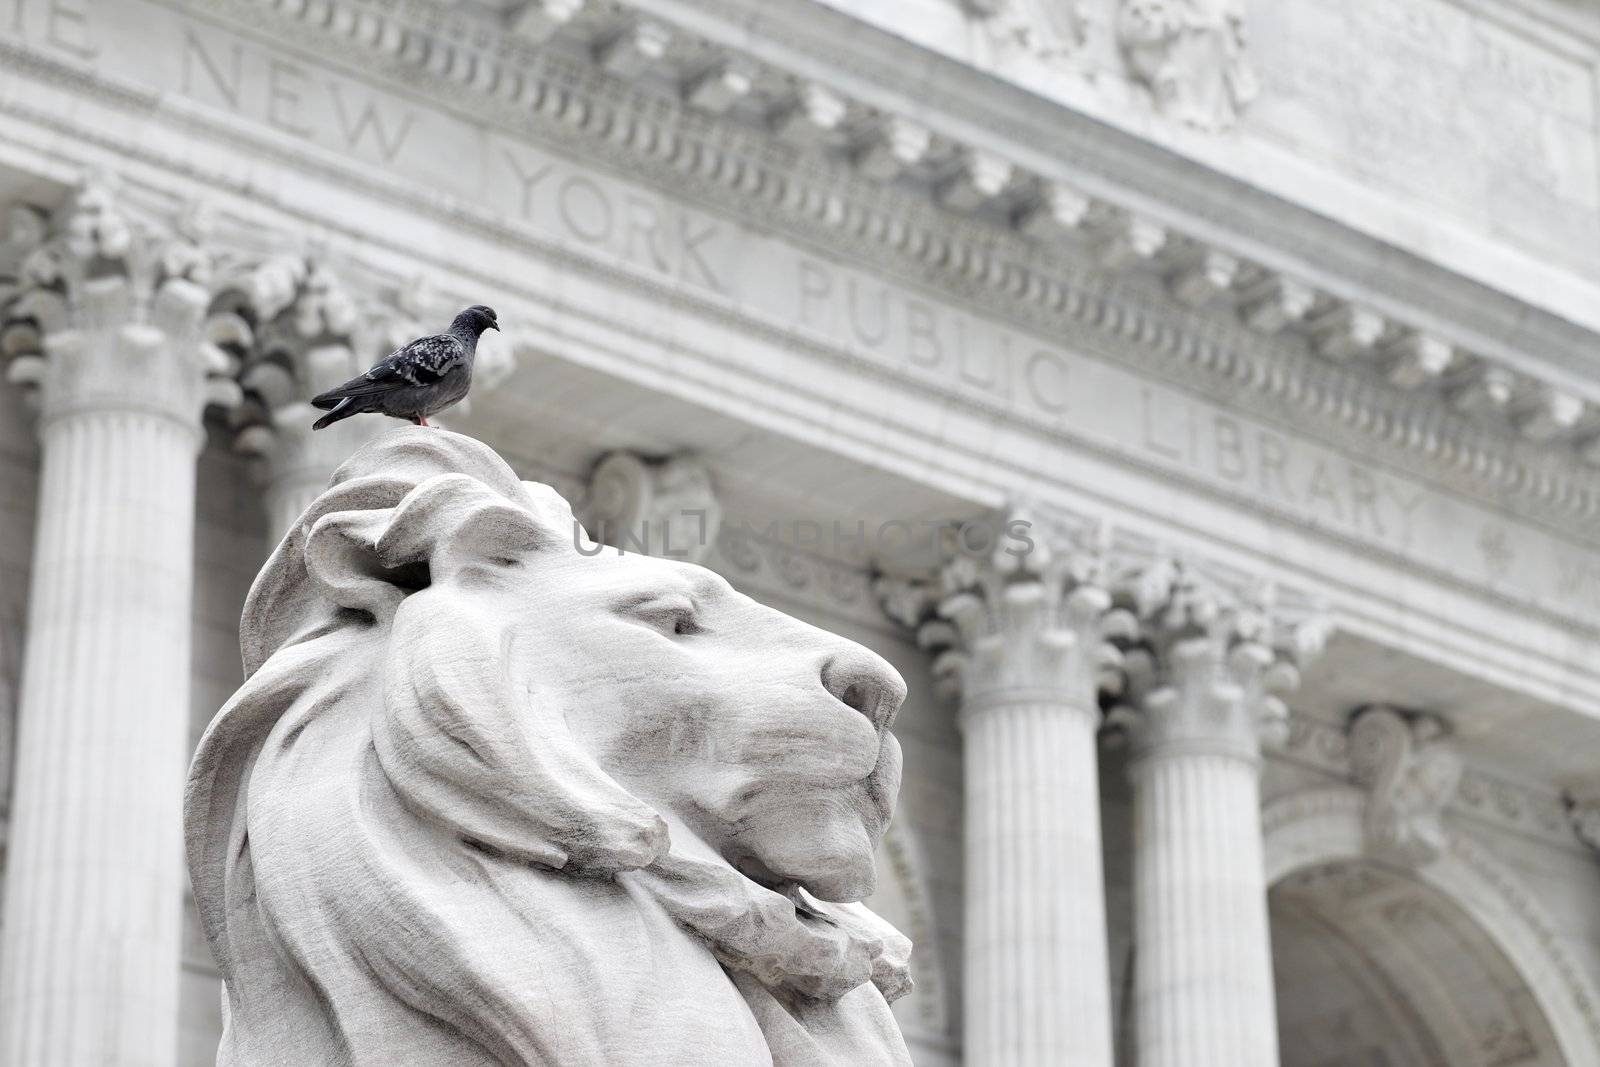 NEW YORK CITY, USA - JUNE 9: Pigeon sitting on a lion statue of New York Public Library. June 9, 2012 in New York City, USA